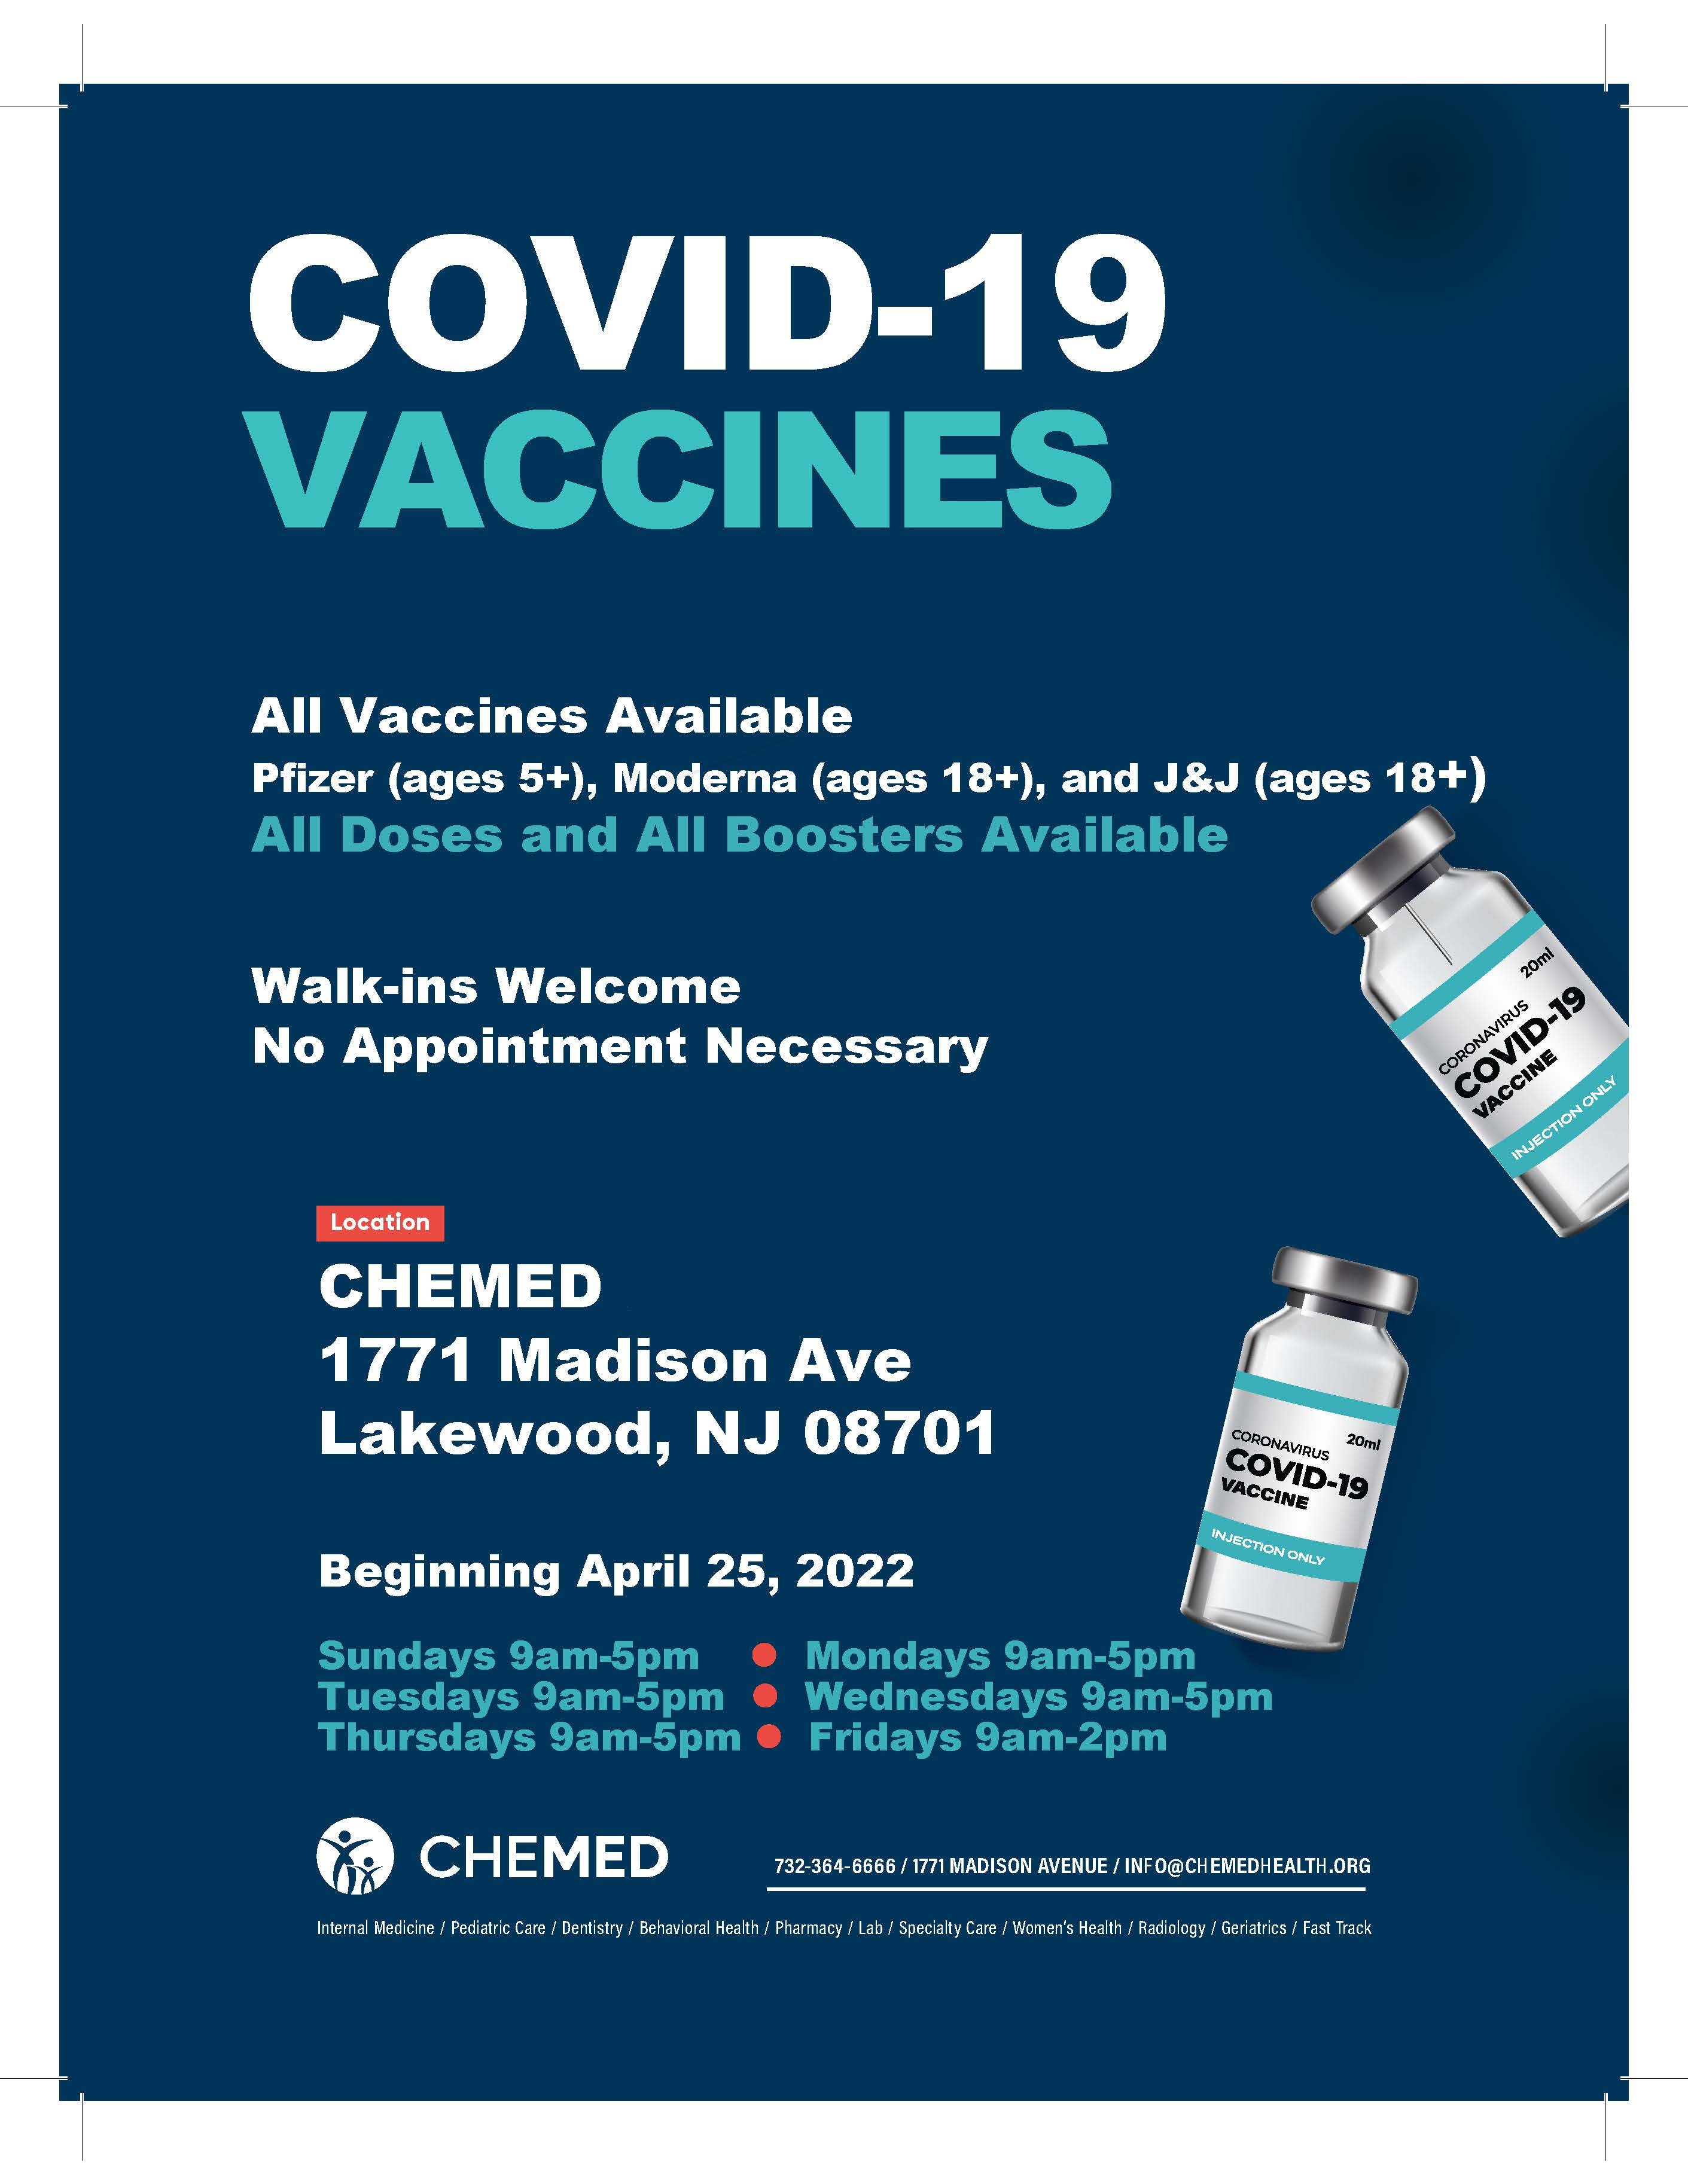 COVID VACCINE SCHEDULING INFORMATION